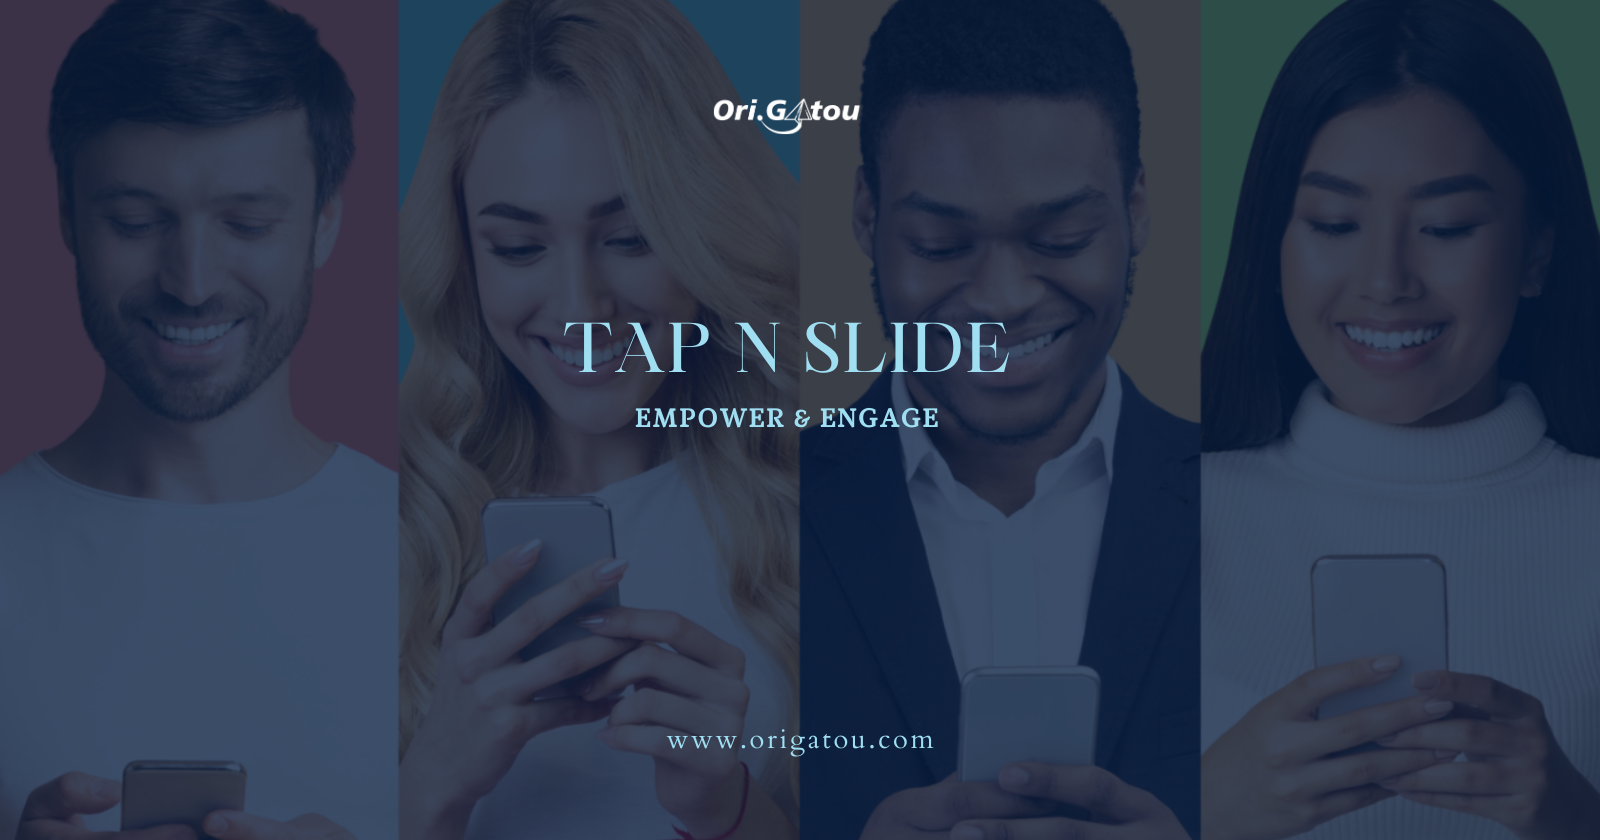 Empower Your Business, Engage Your Customers: Ori.Gatou's Tap N Slide Campaign cover image